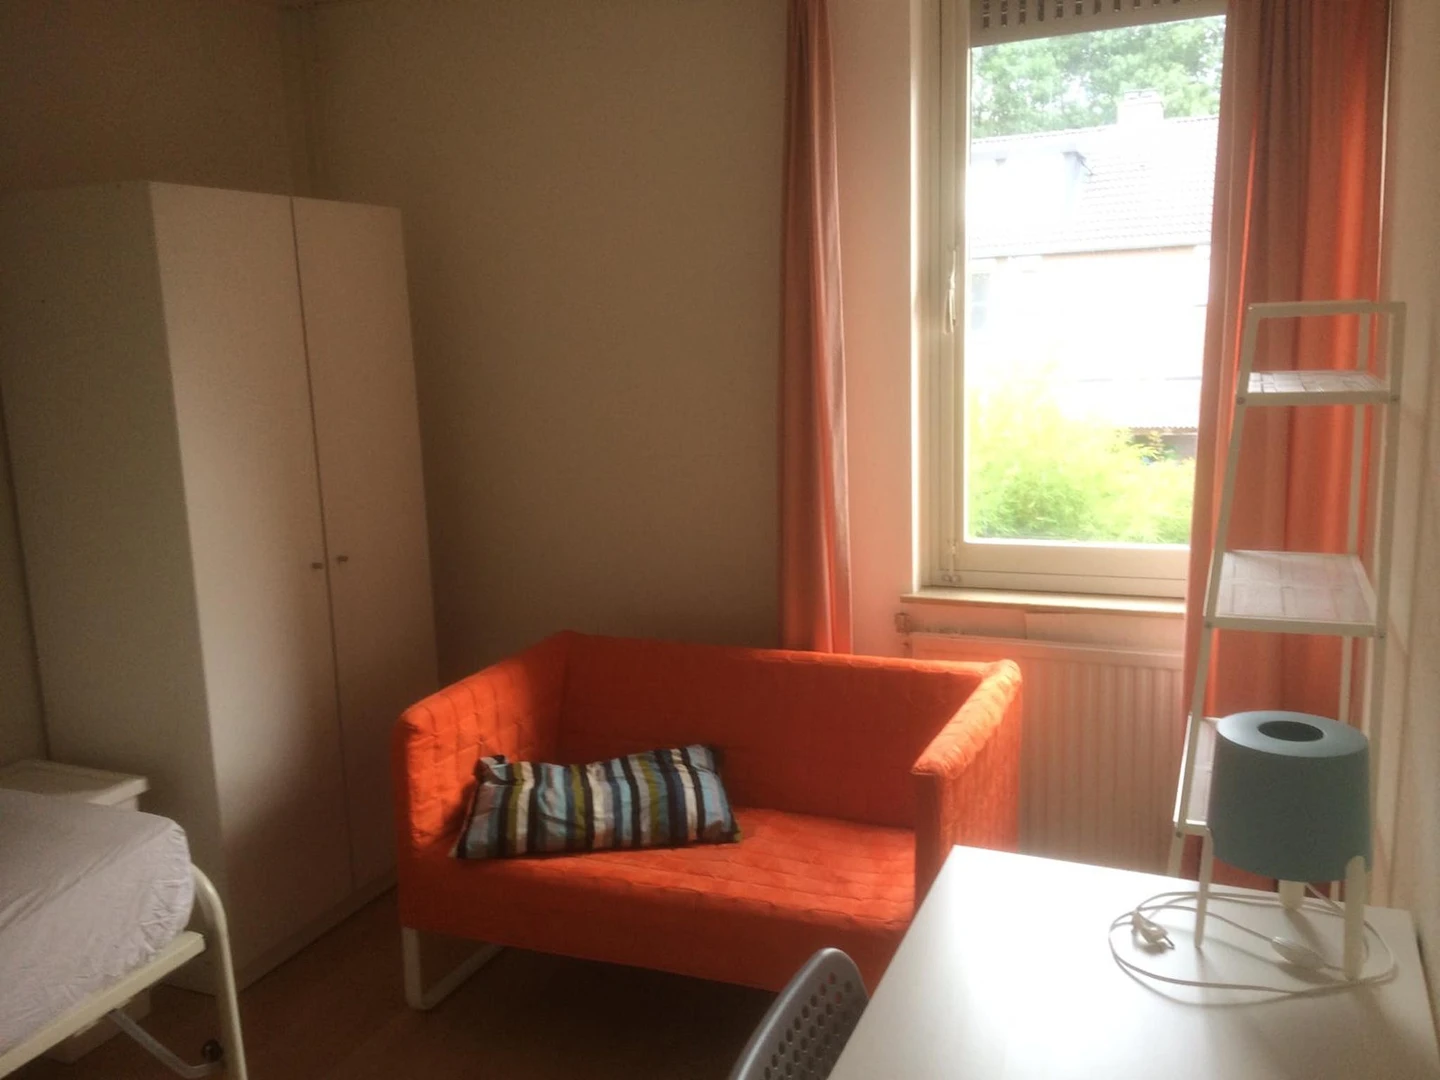 Renting rooms by the month in Maastricht